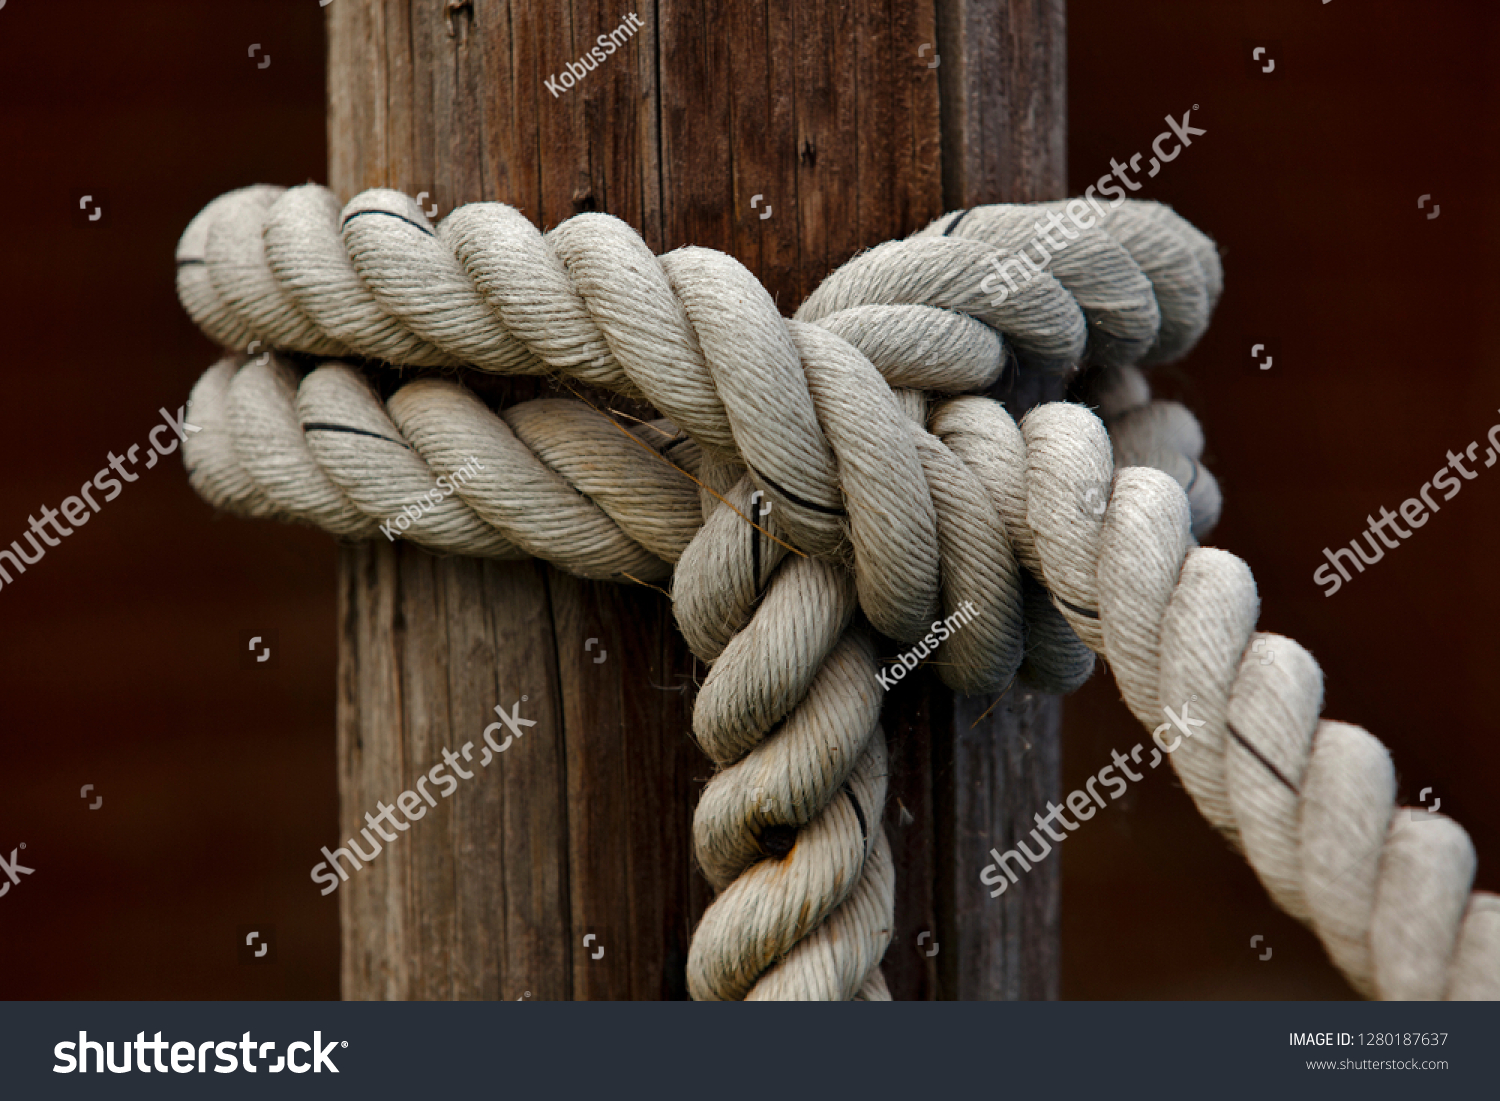 strong thick rope